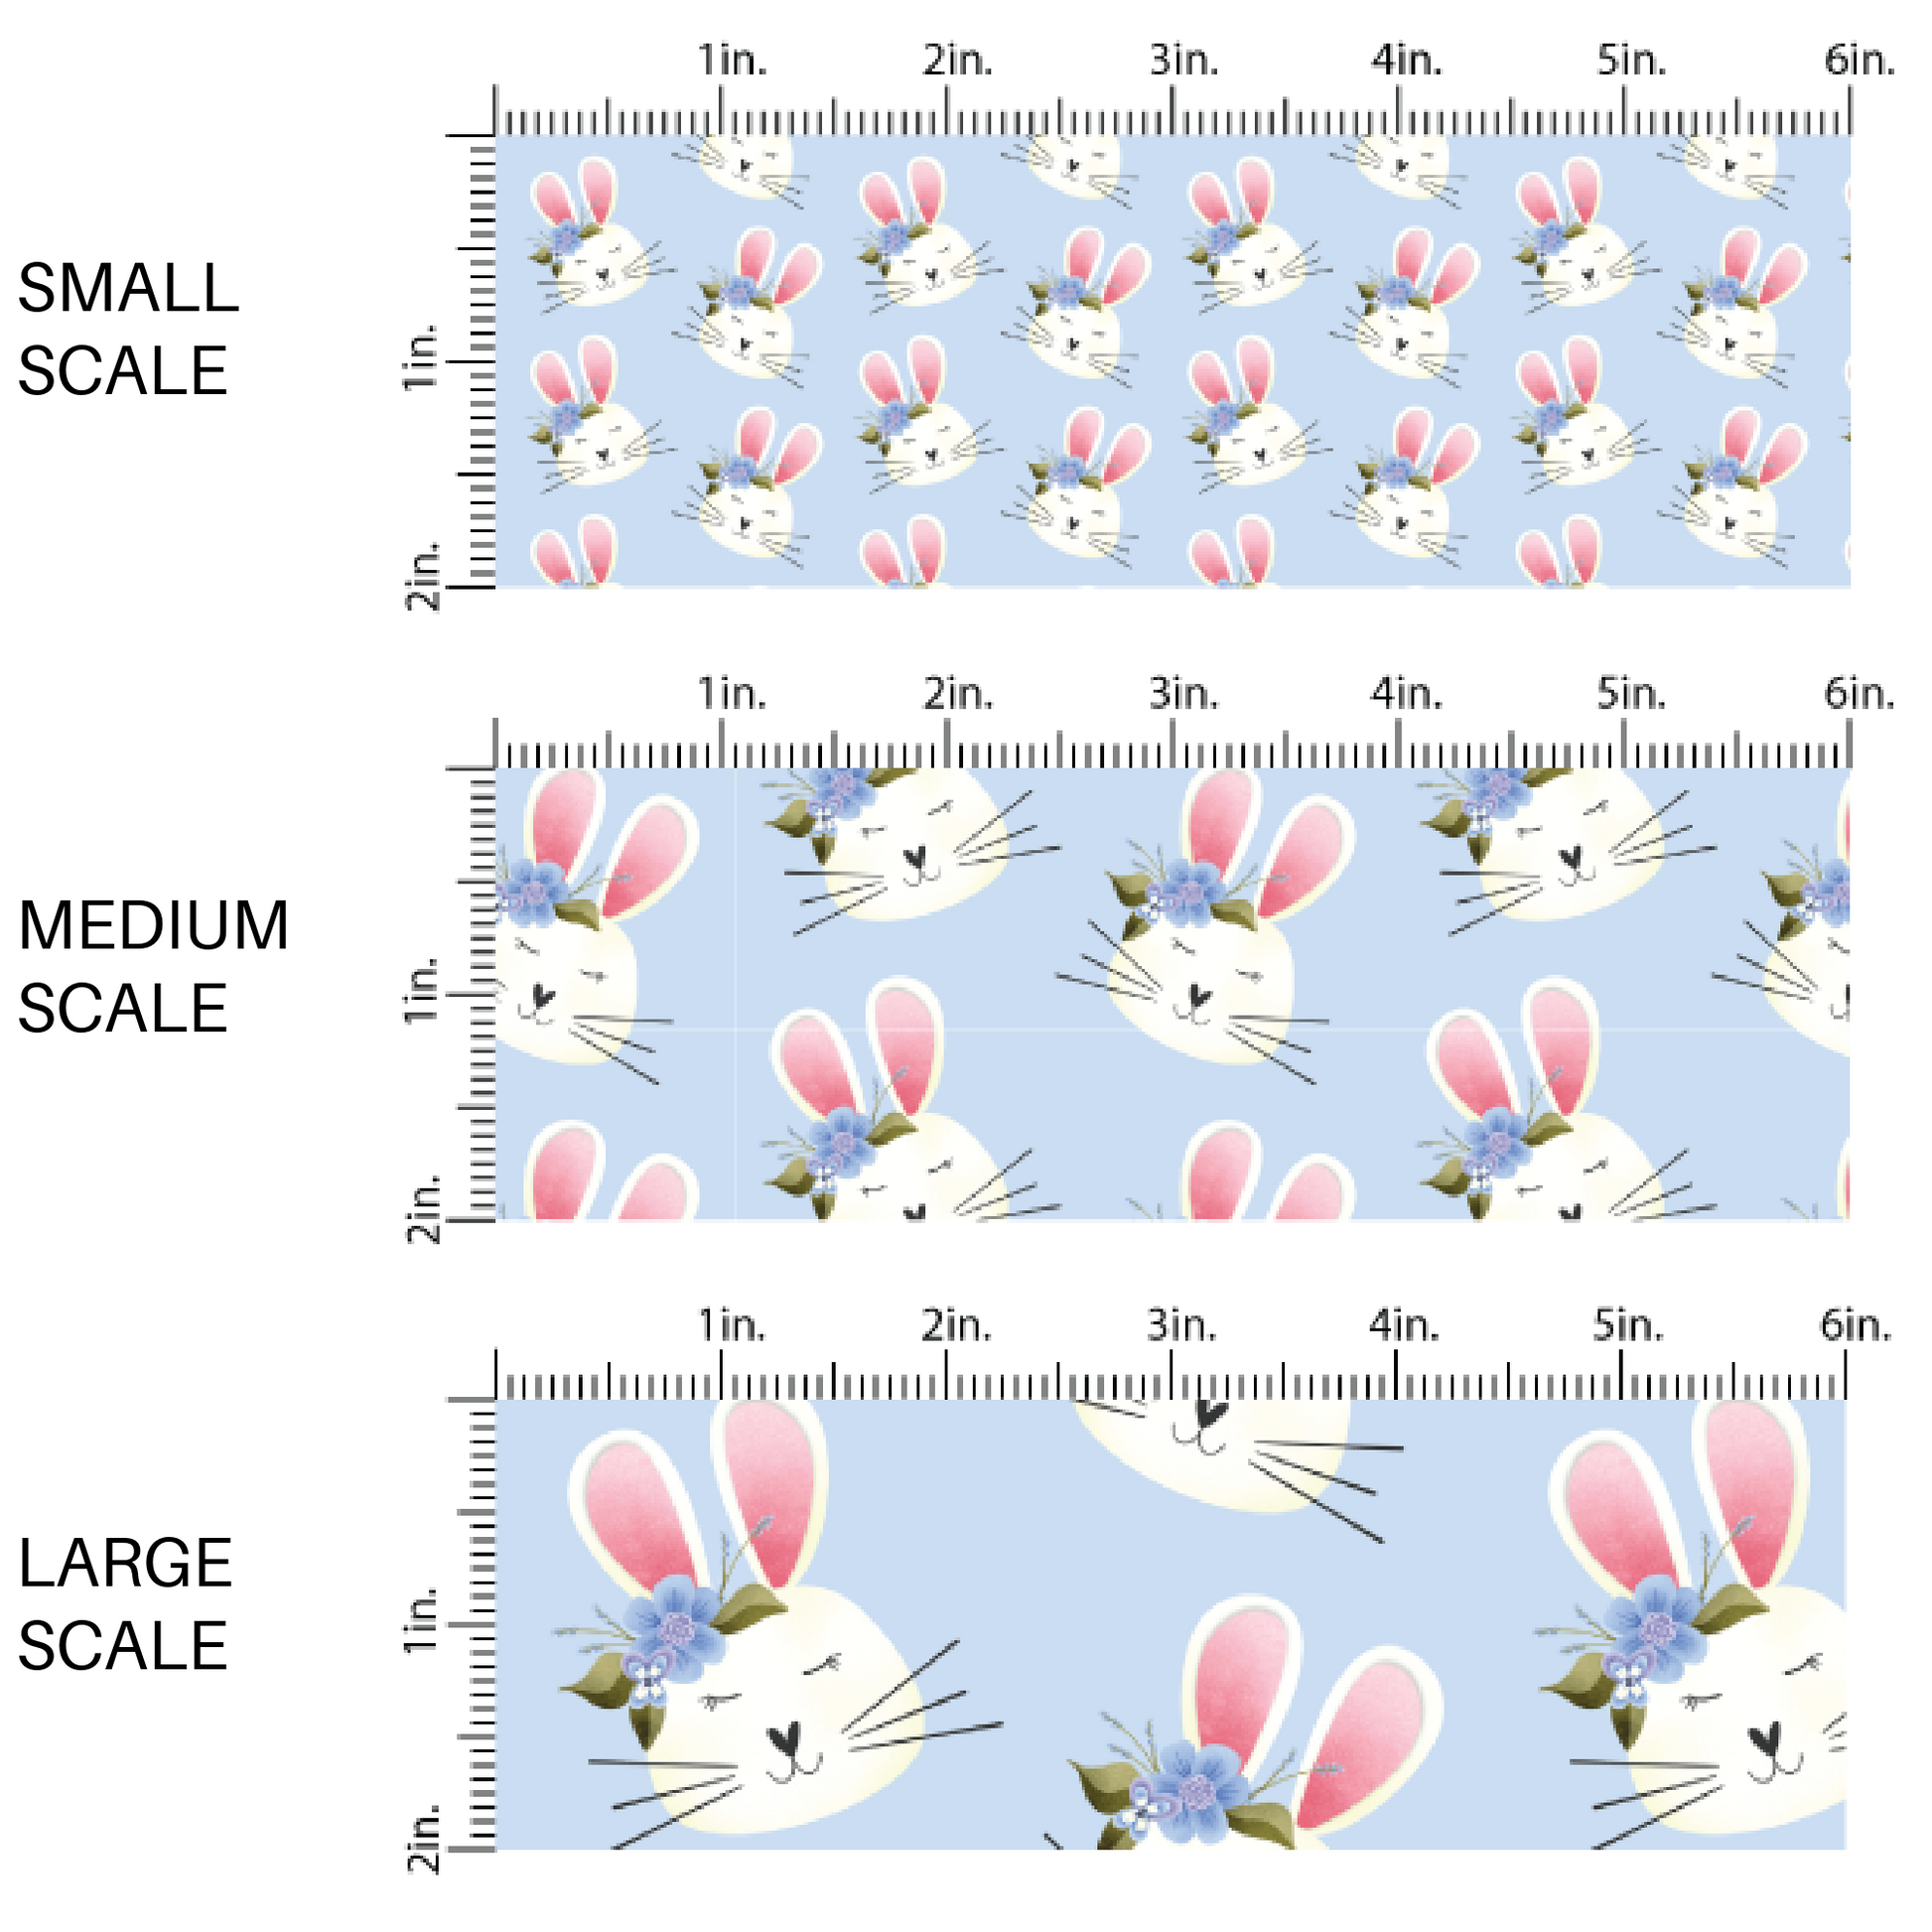 blue fabric by the yard scaled image guide with scattered white bunny rabbits and flowers